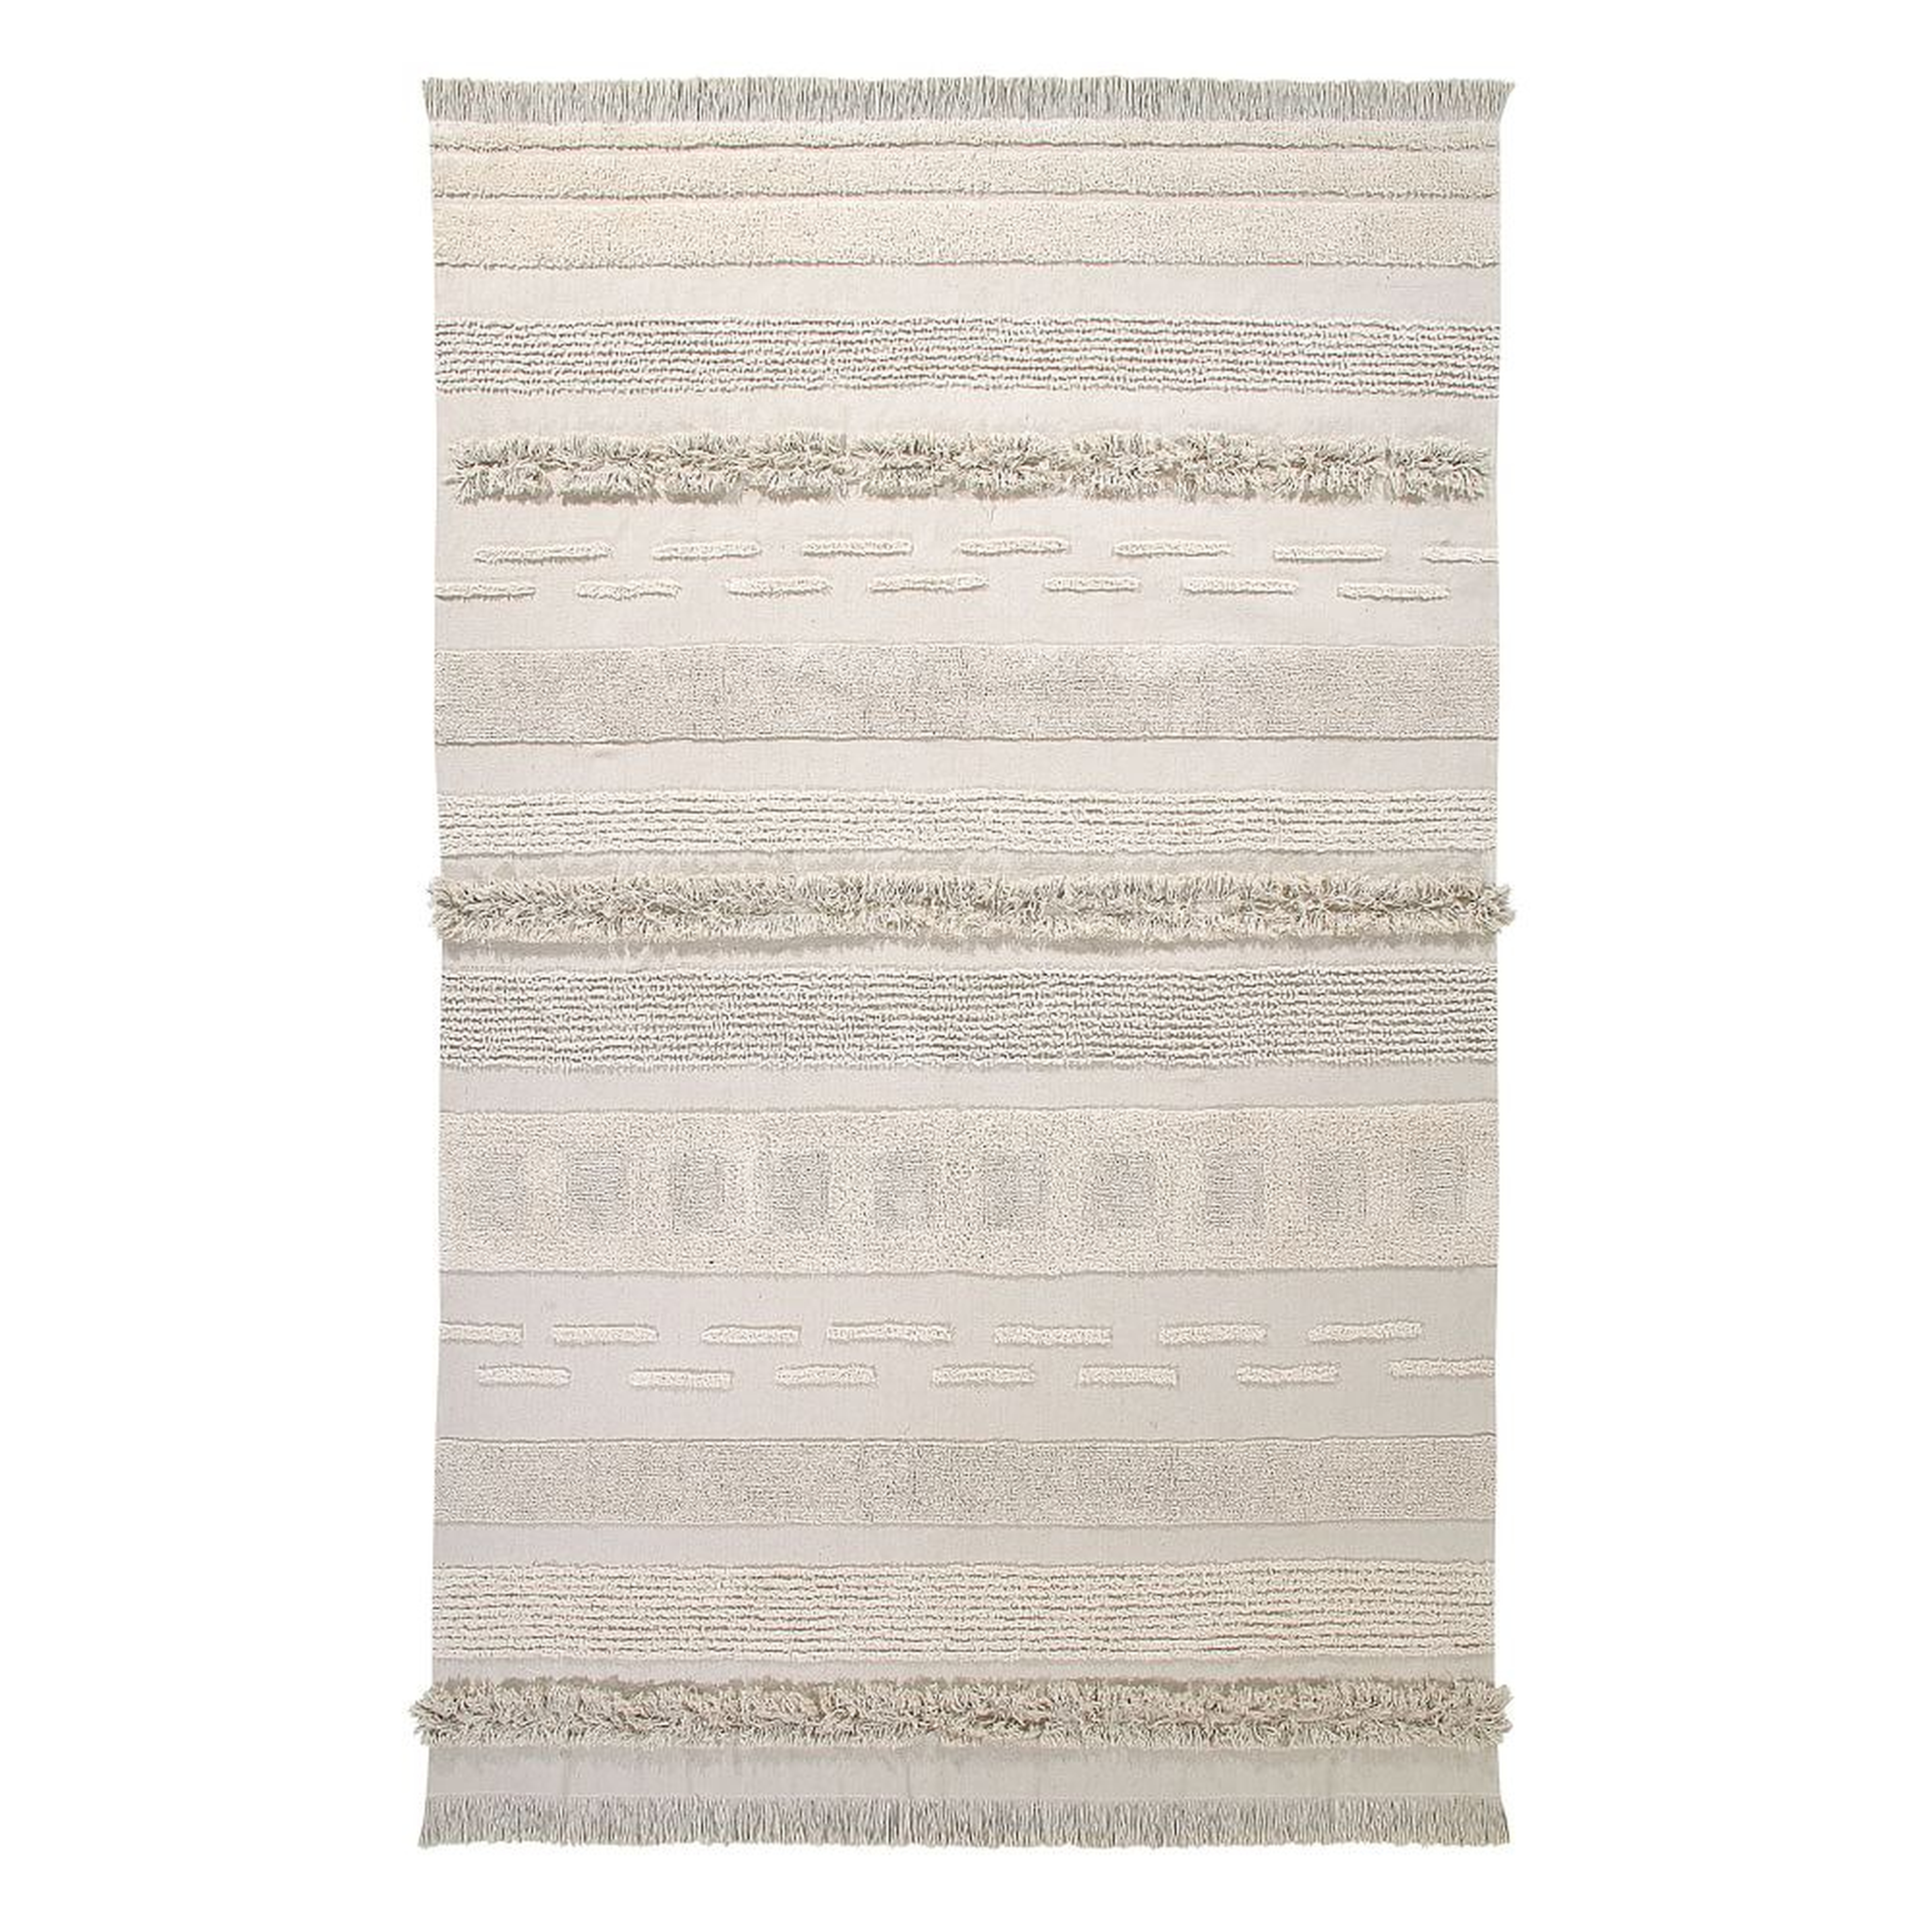 Airy Cotton Tufted Washable Rug, 5x8 , Natural - Pottery Barn Teen